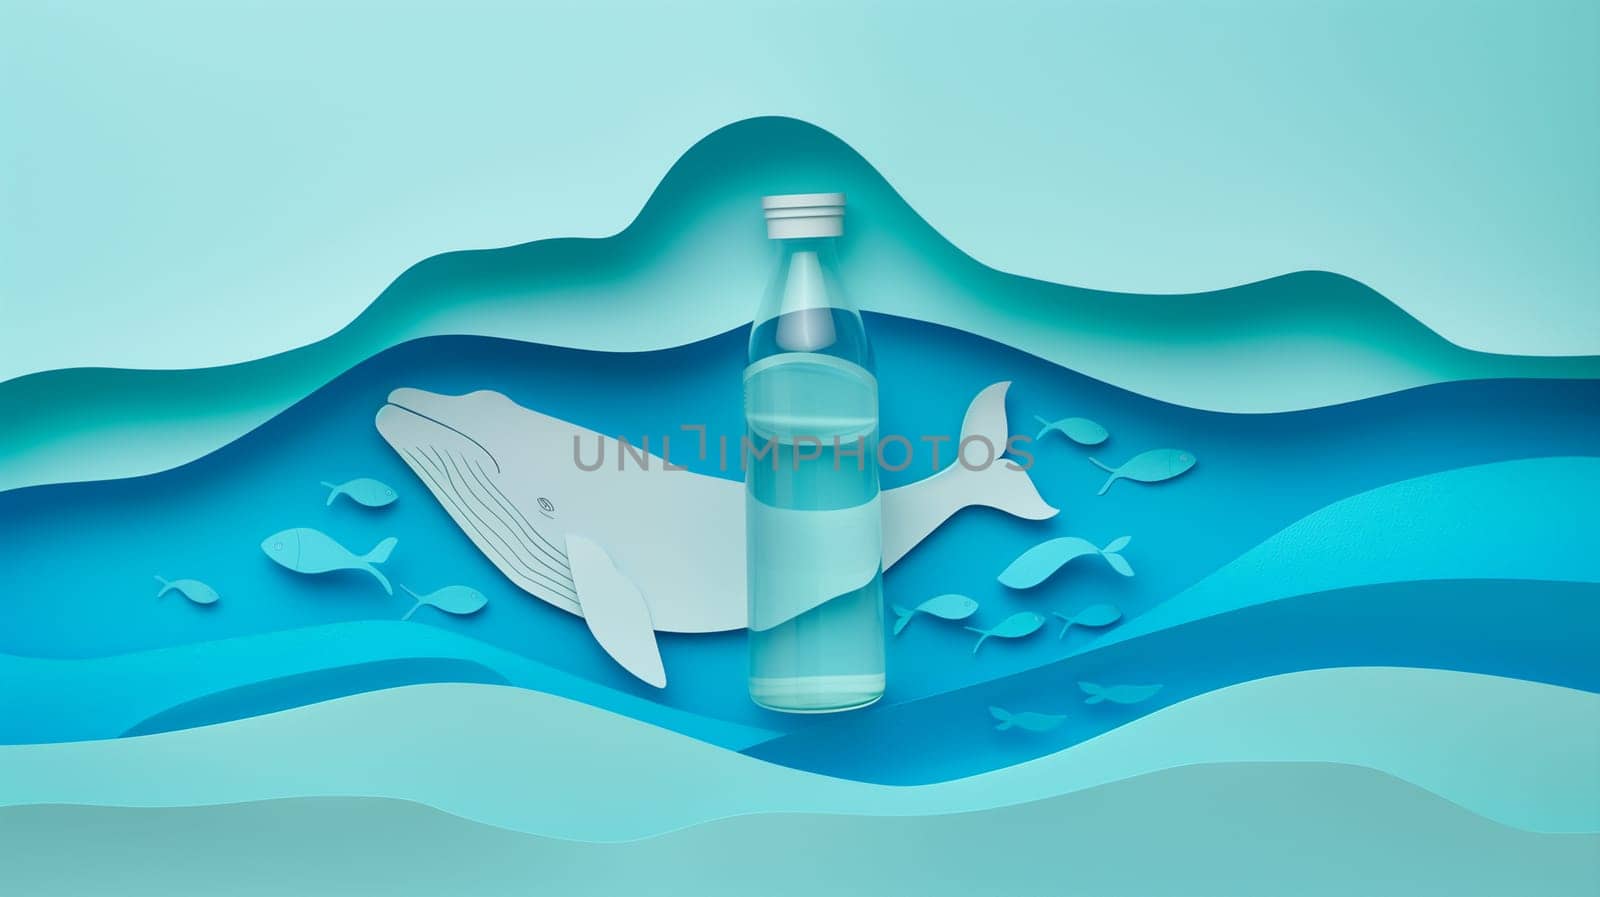 Paper Bottle Containing Whale by Sd28DimoN_1976